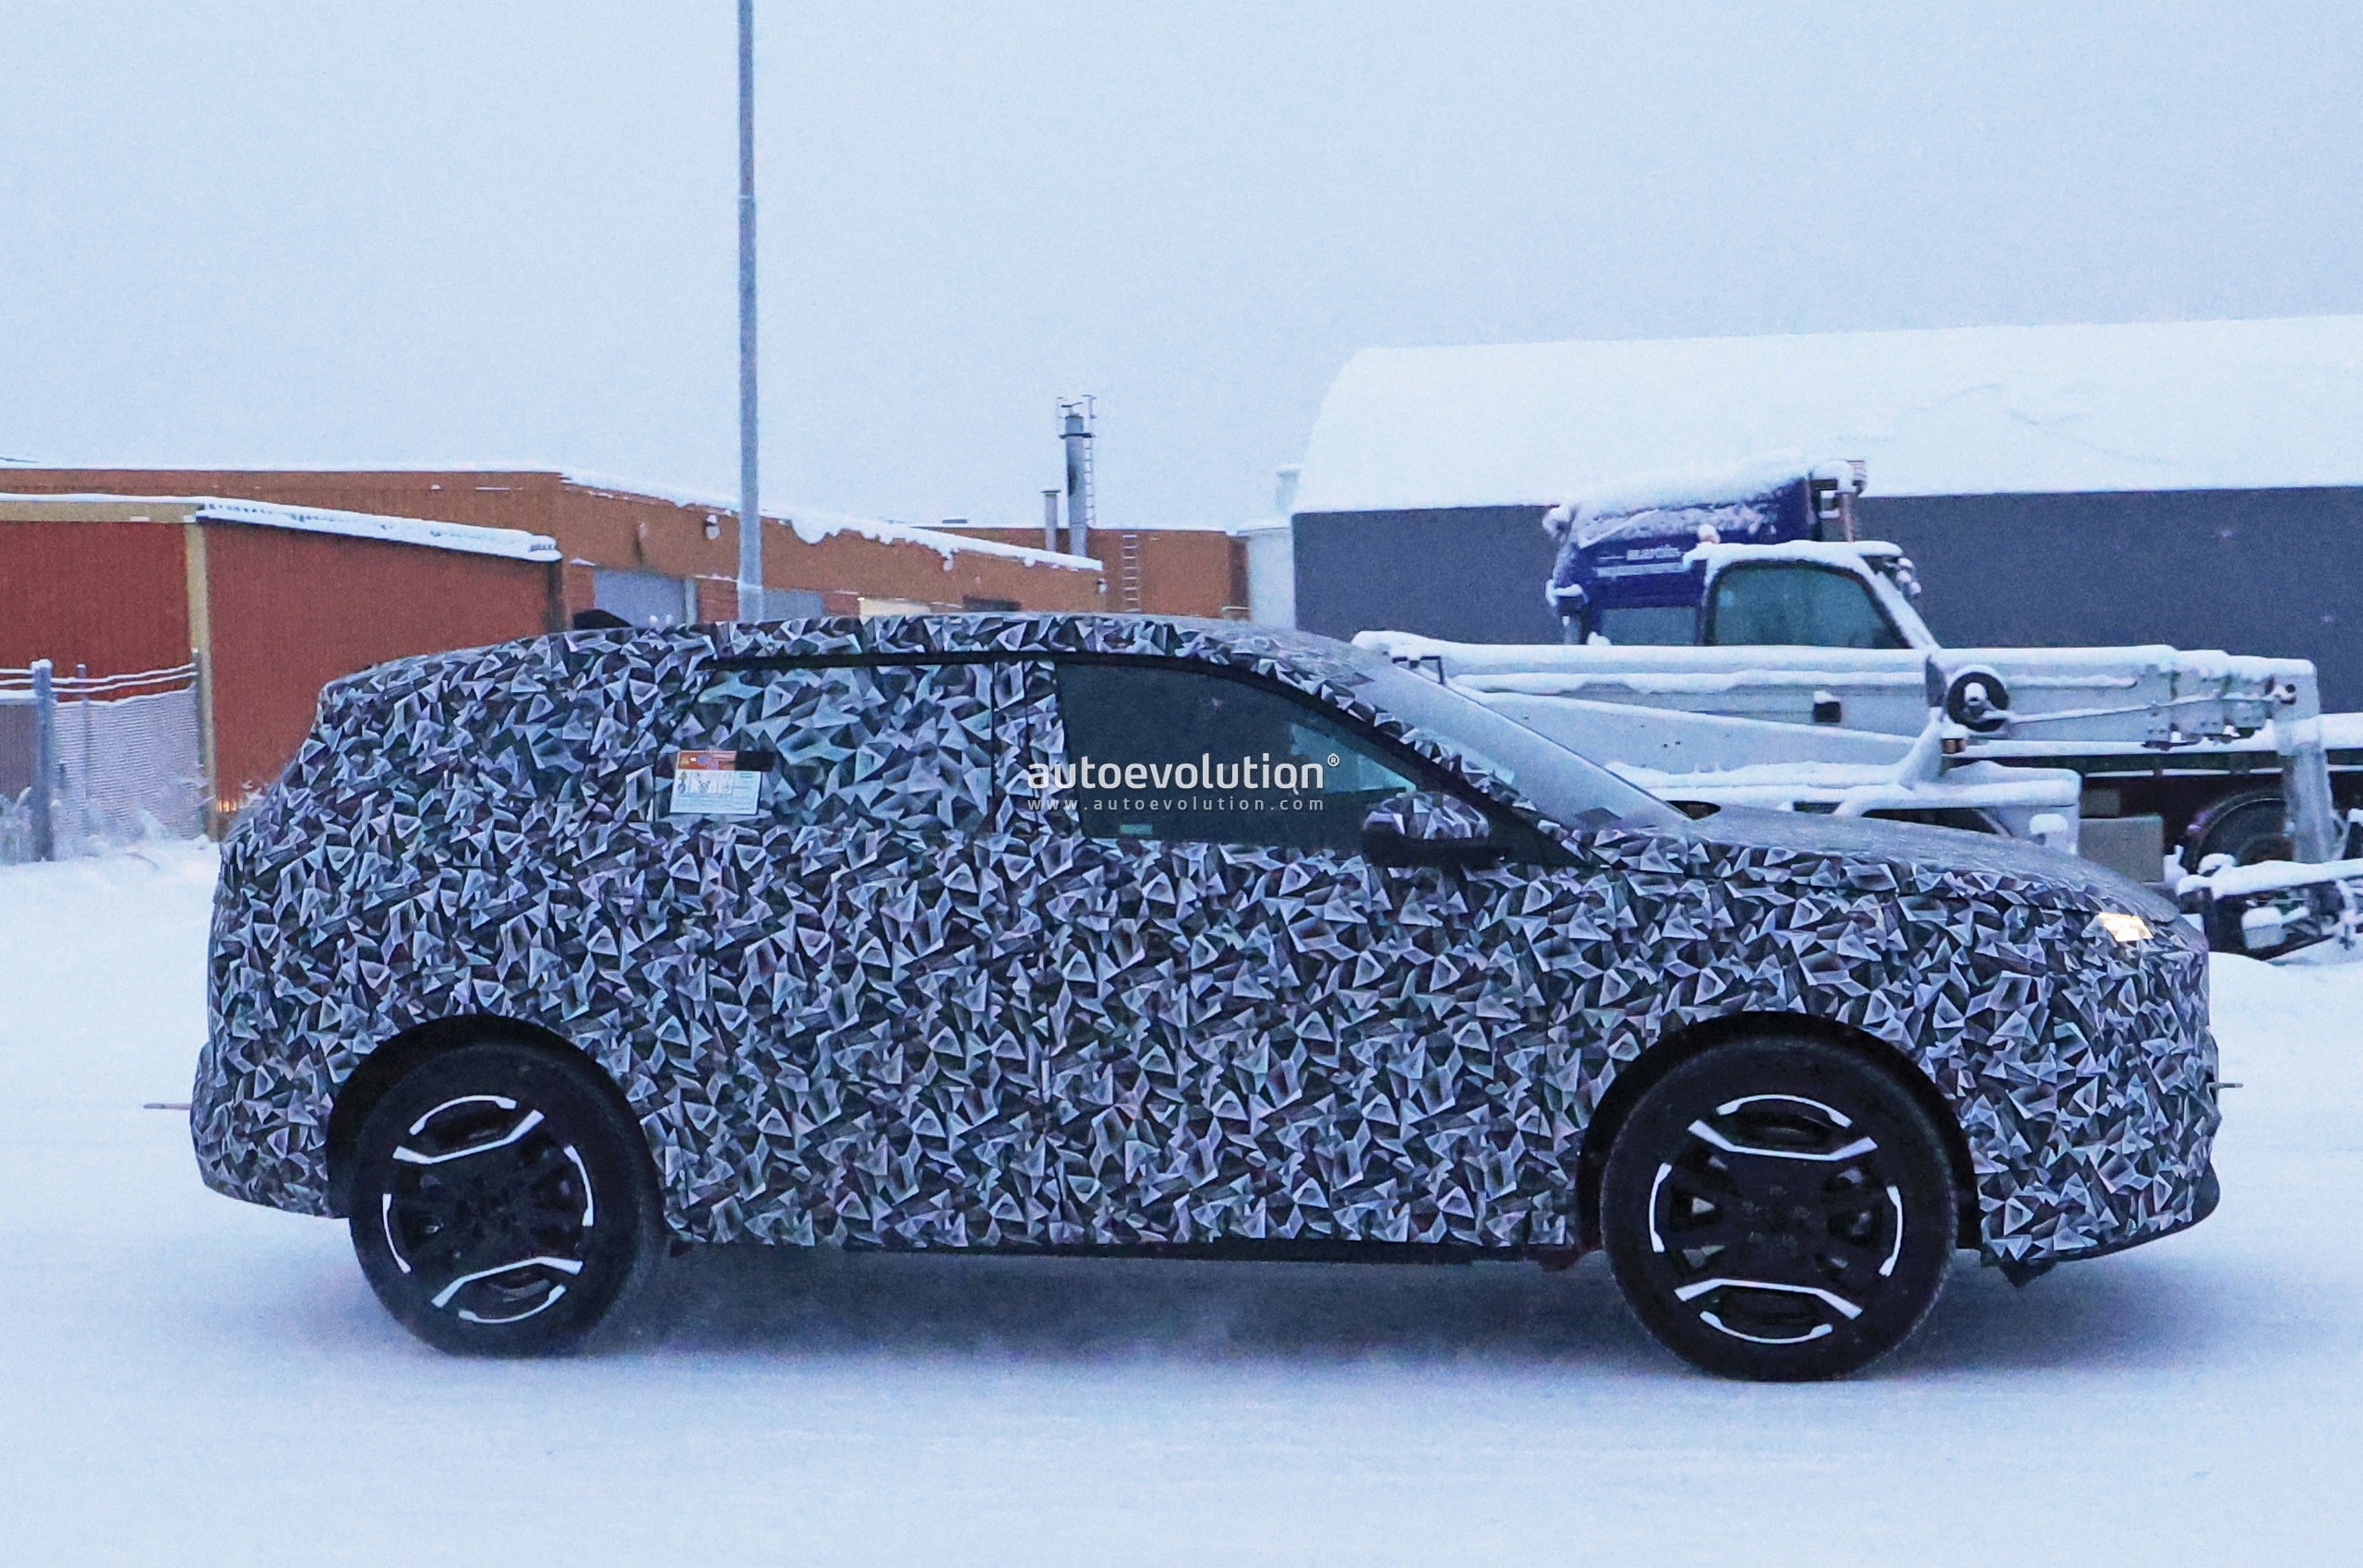 Next-Gen Peugeot 5008 Spied For The First Time With Boxy Shape